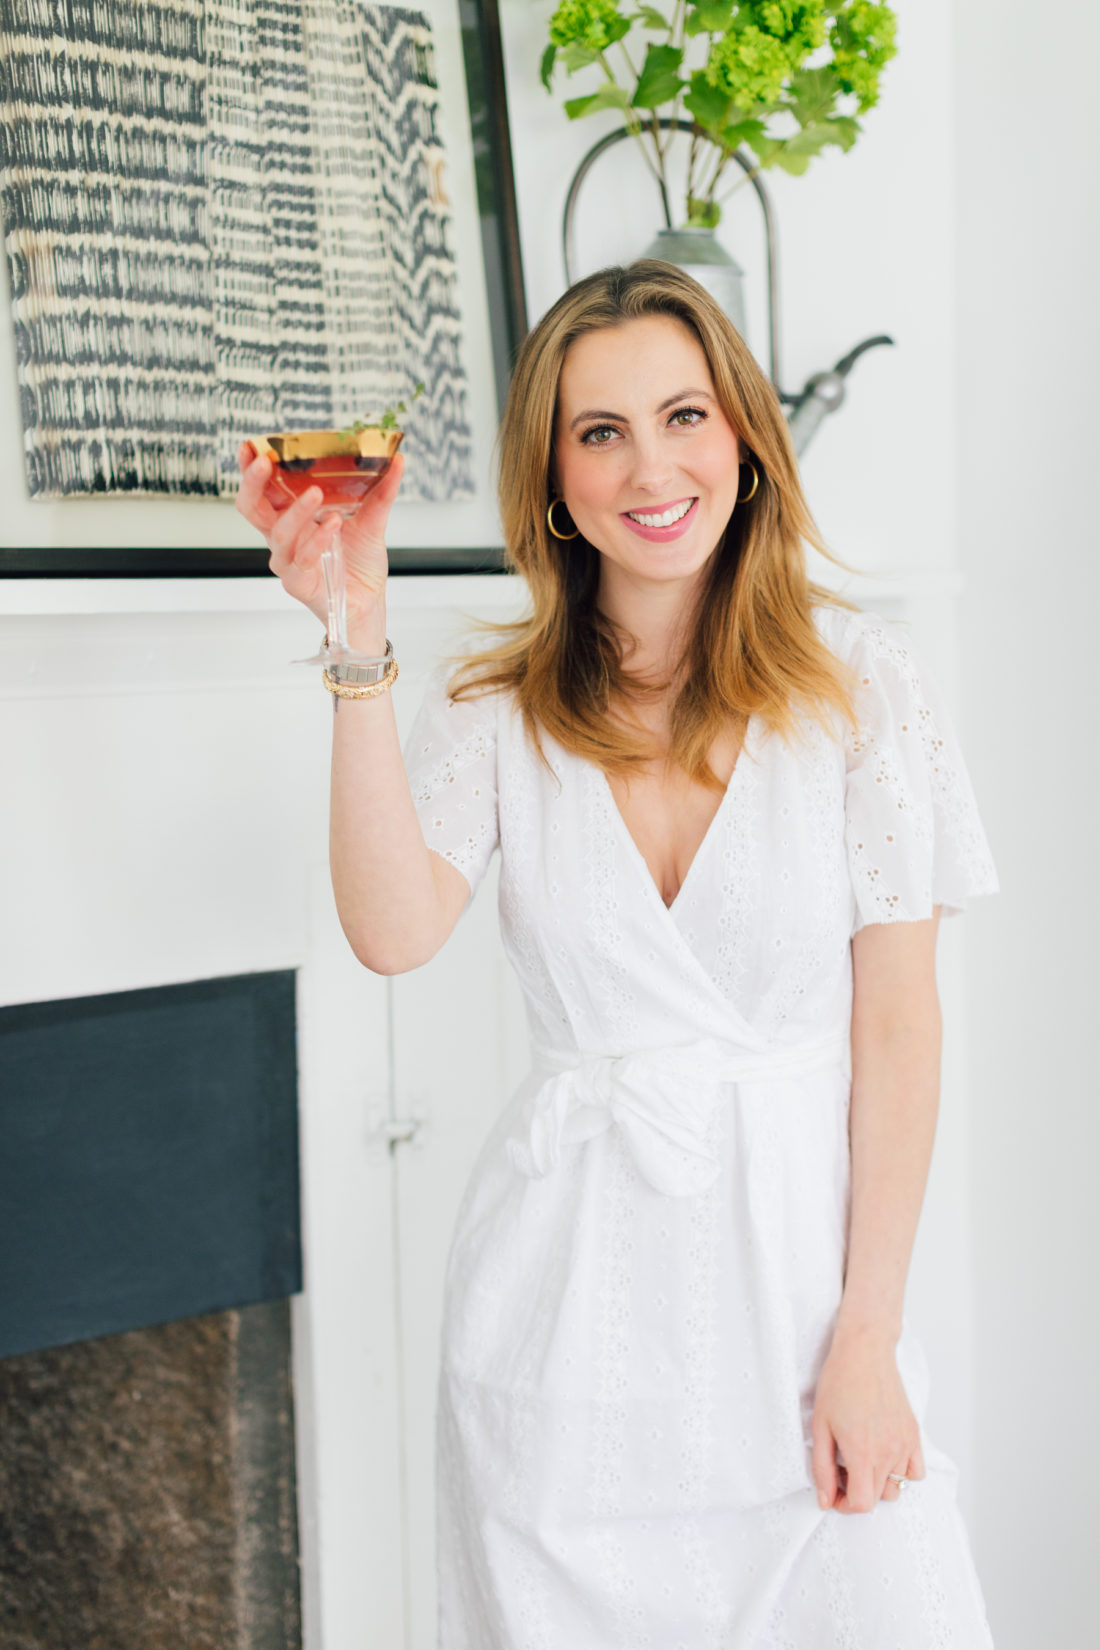 Eva Amurri Martino of Happily Eva After shares her Mommy Juice Cocktail for Mother's Day